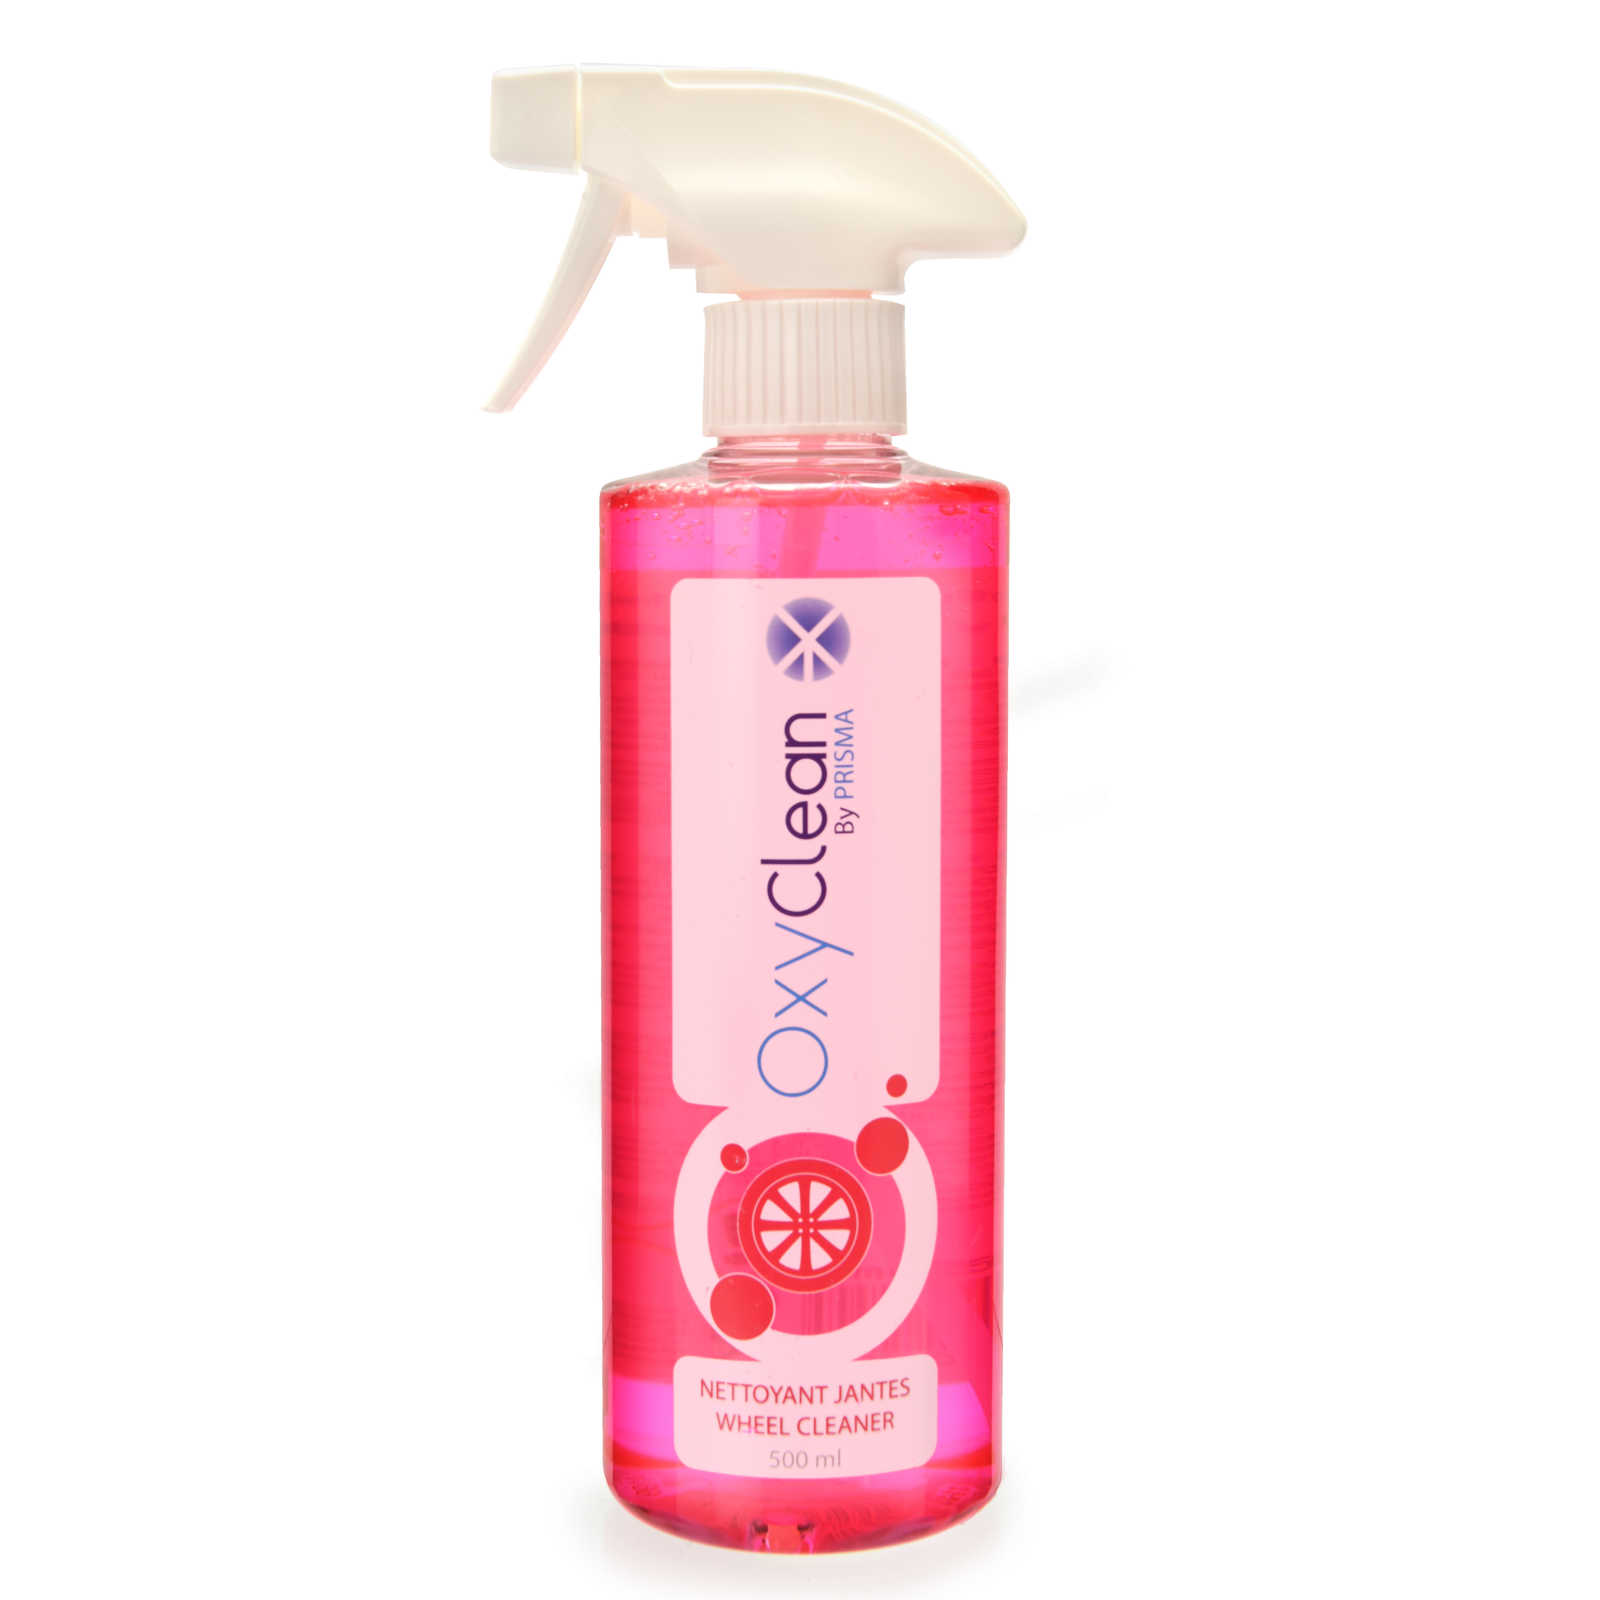 Oxyclean